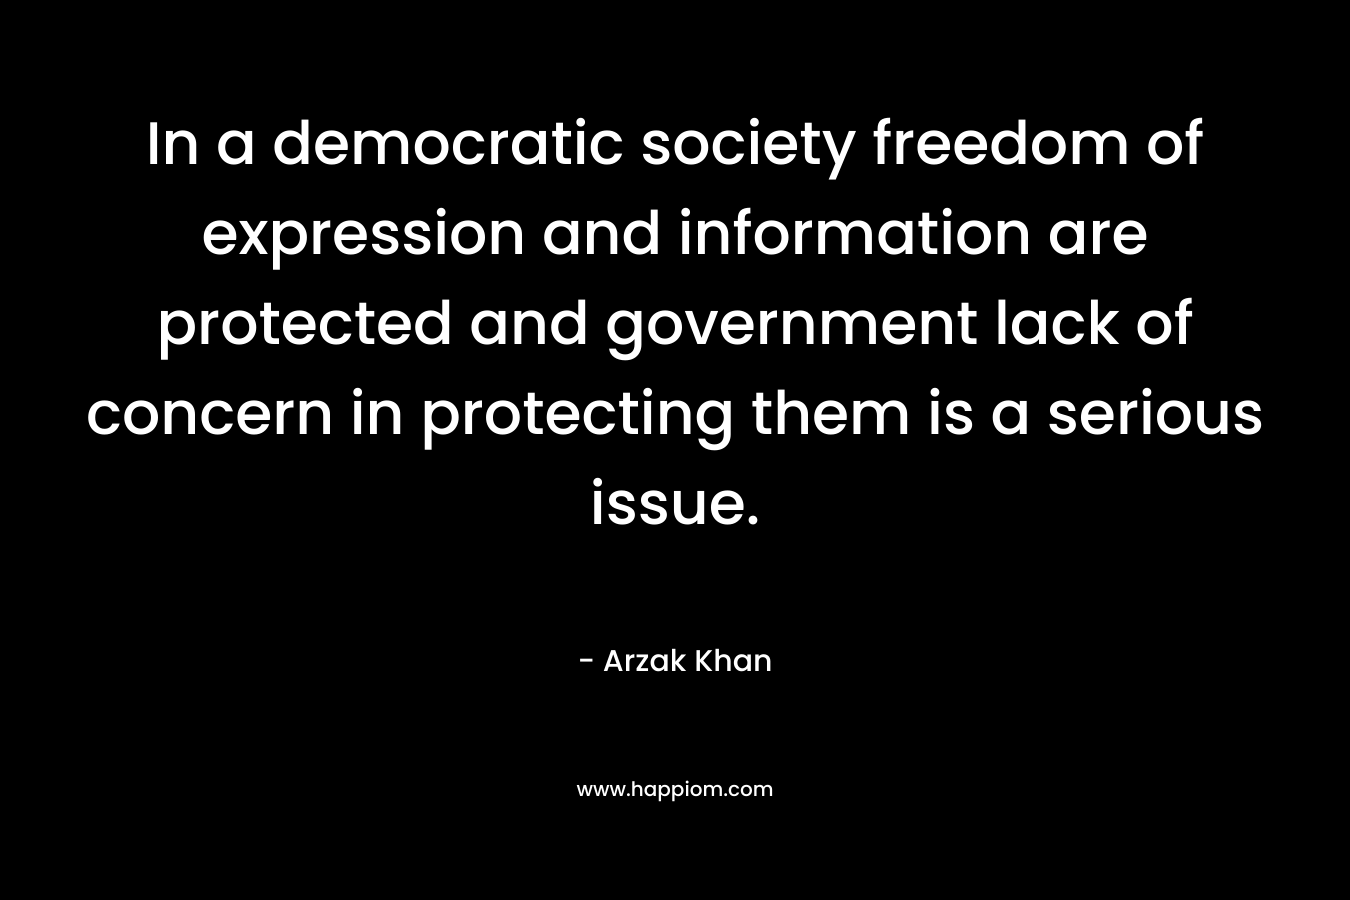 In a democratic society freedom of expression and information are protected and government lack of concern in protecting them is a serious issue. – Arzak Khan